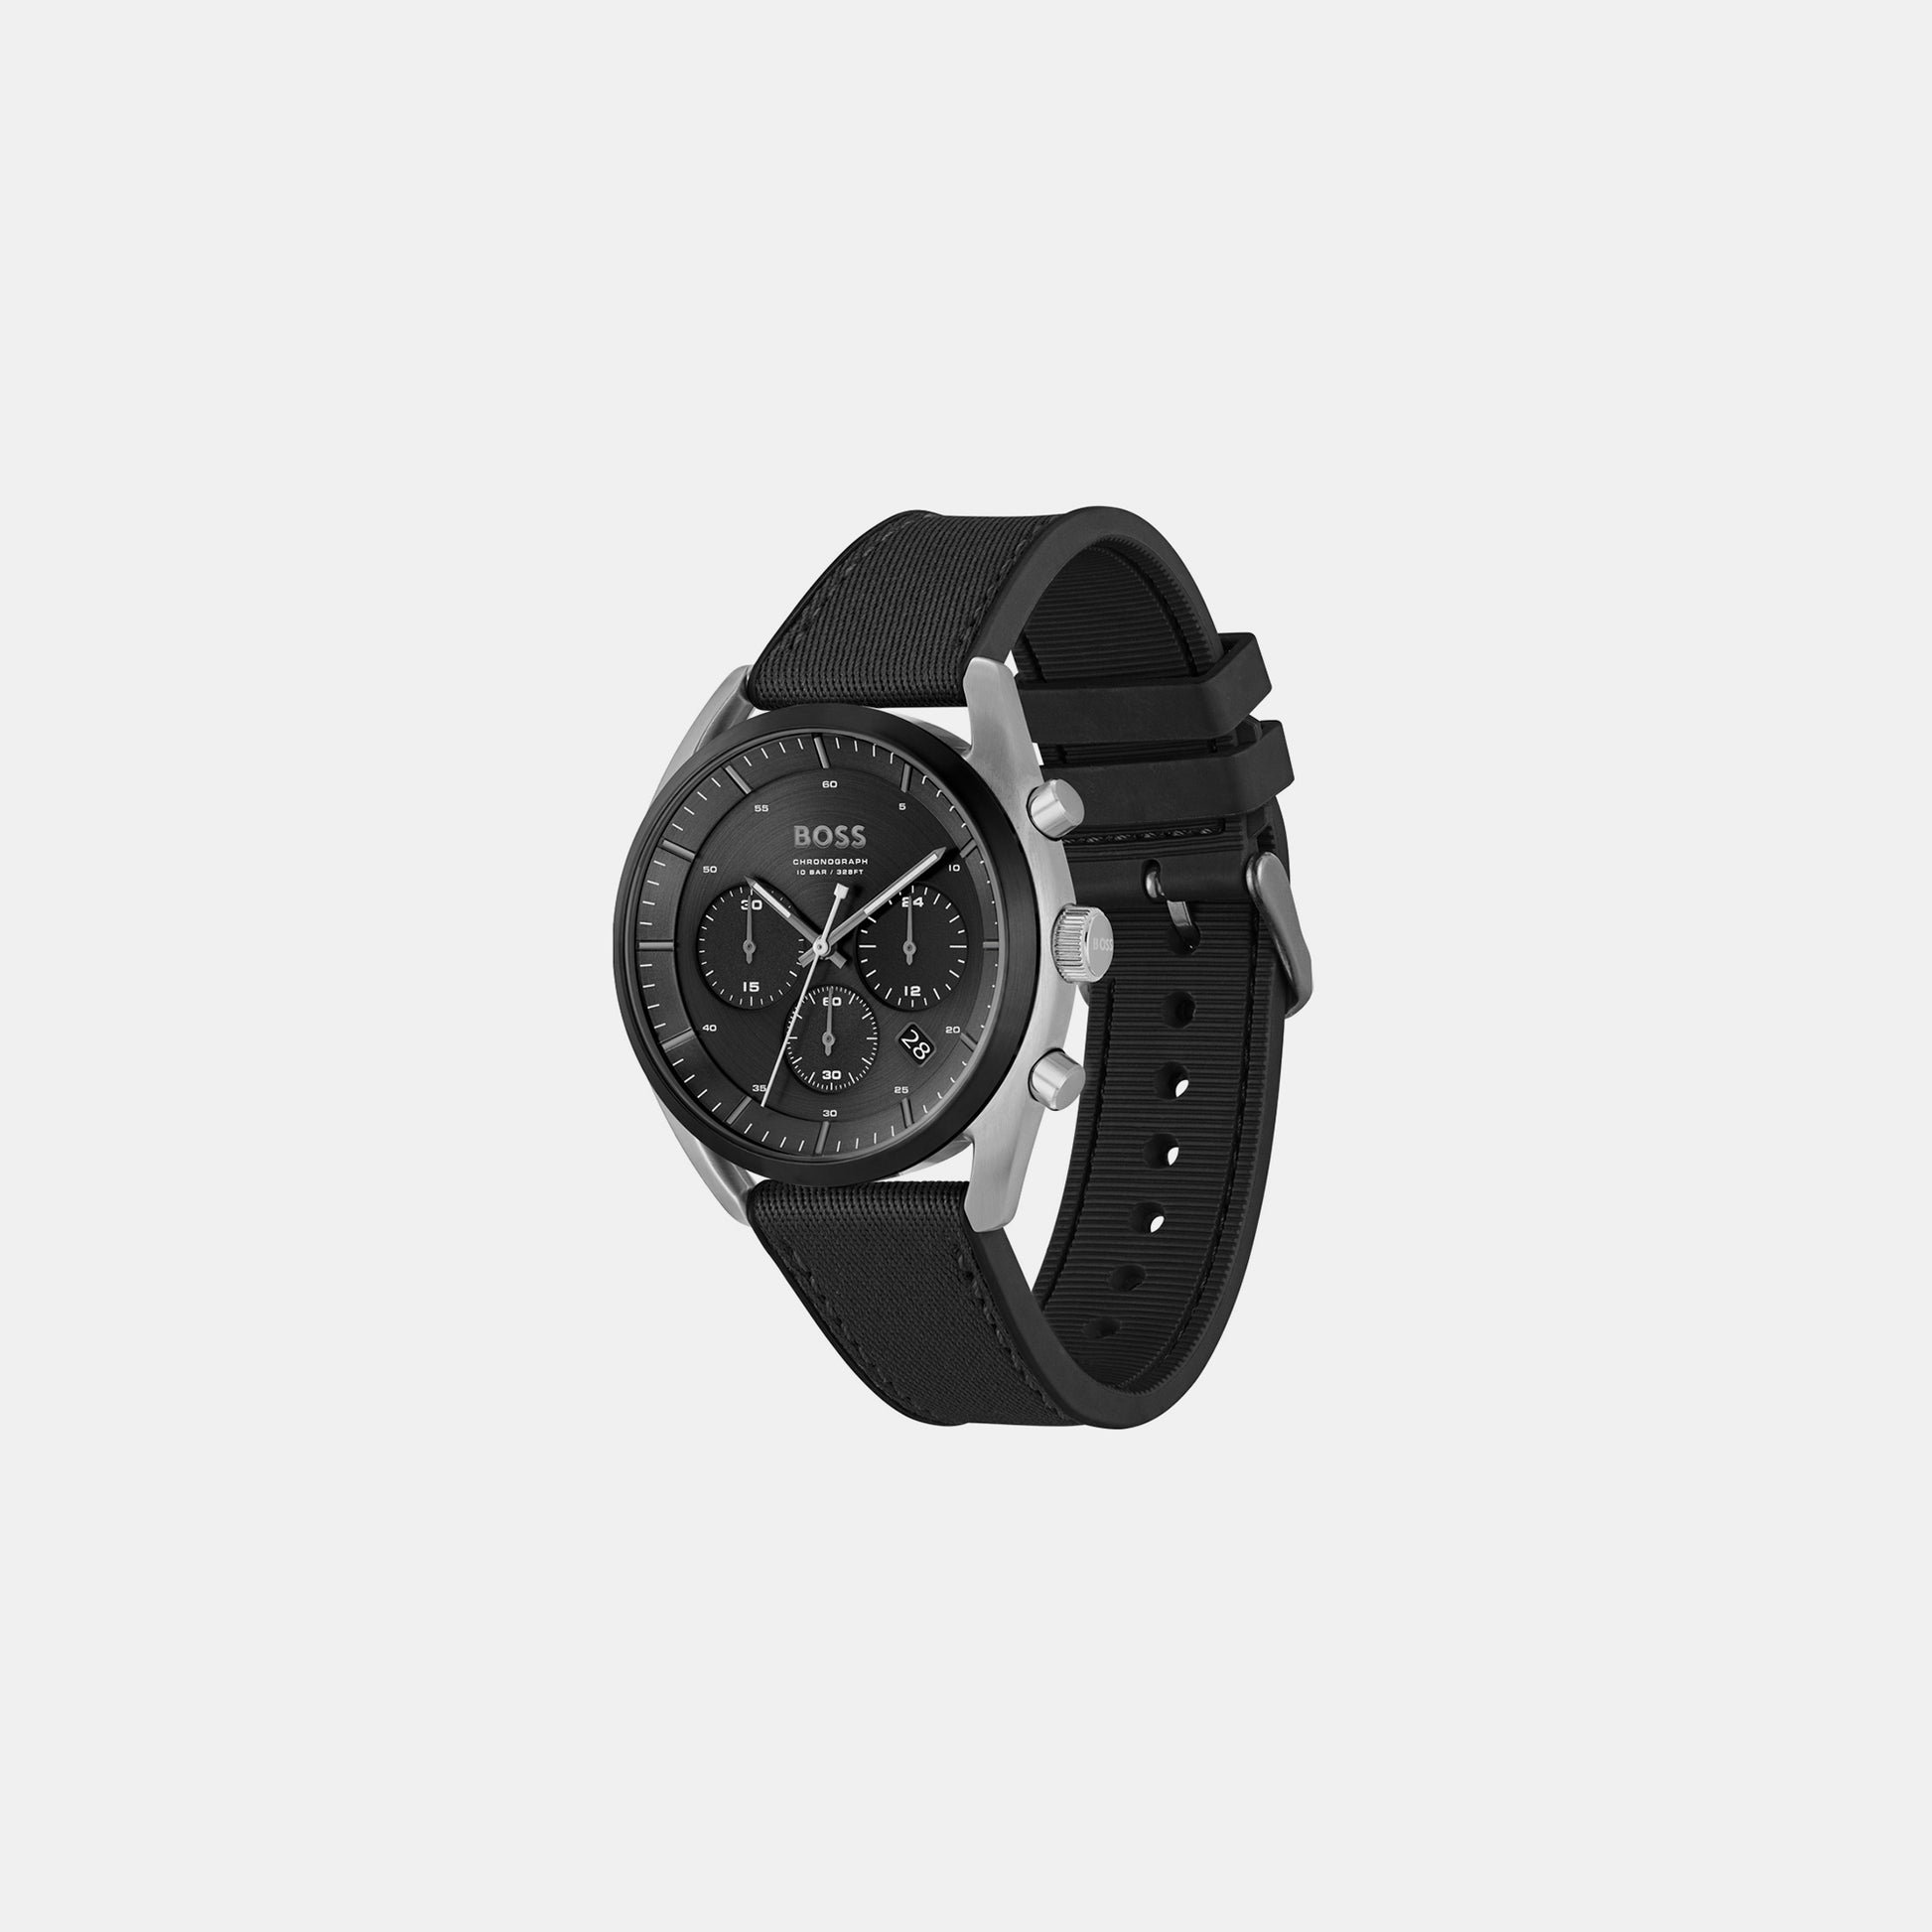 Top Male Black Just Silicon In – Watch 1514091 Chronograph Time